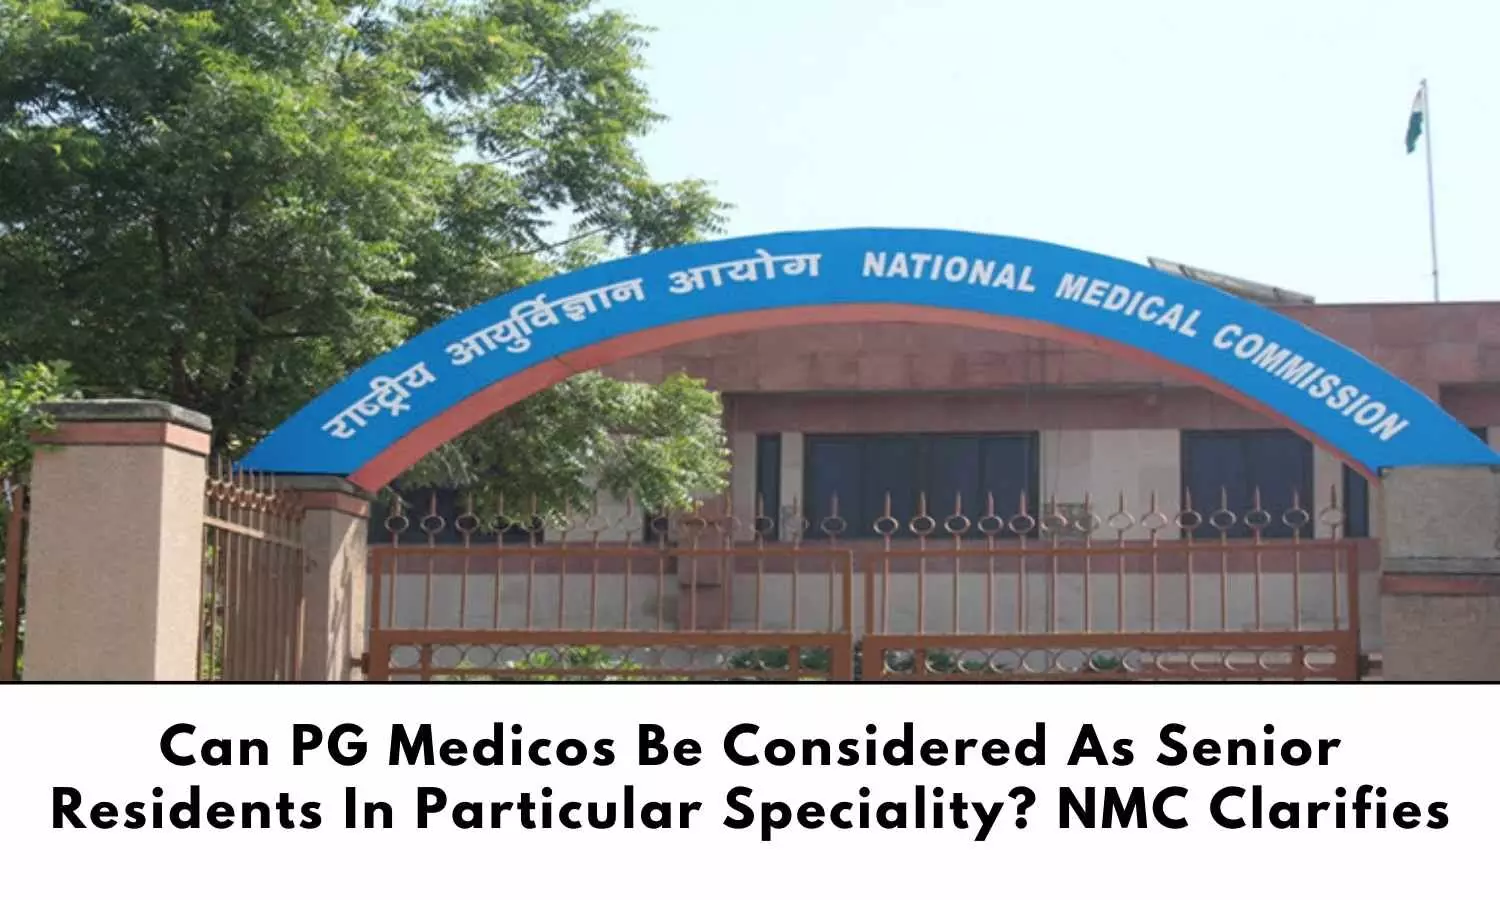 Can PG medicos be considered as senior residents in particular speciality? NMC clarifies